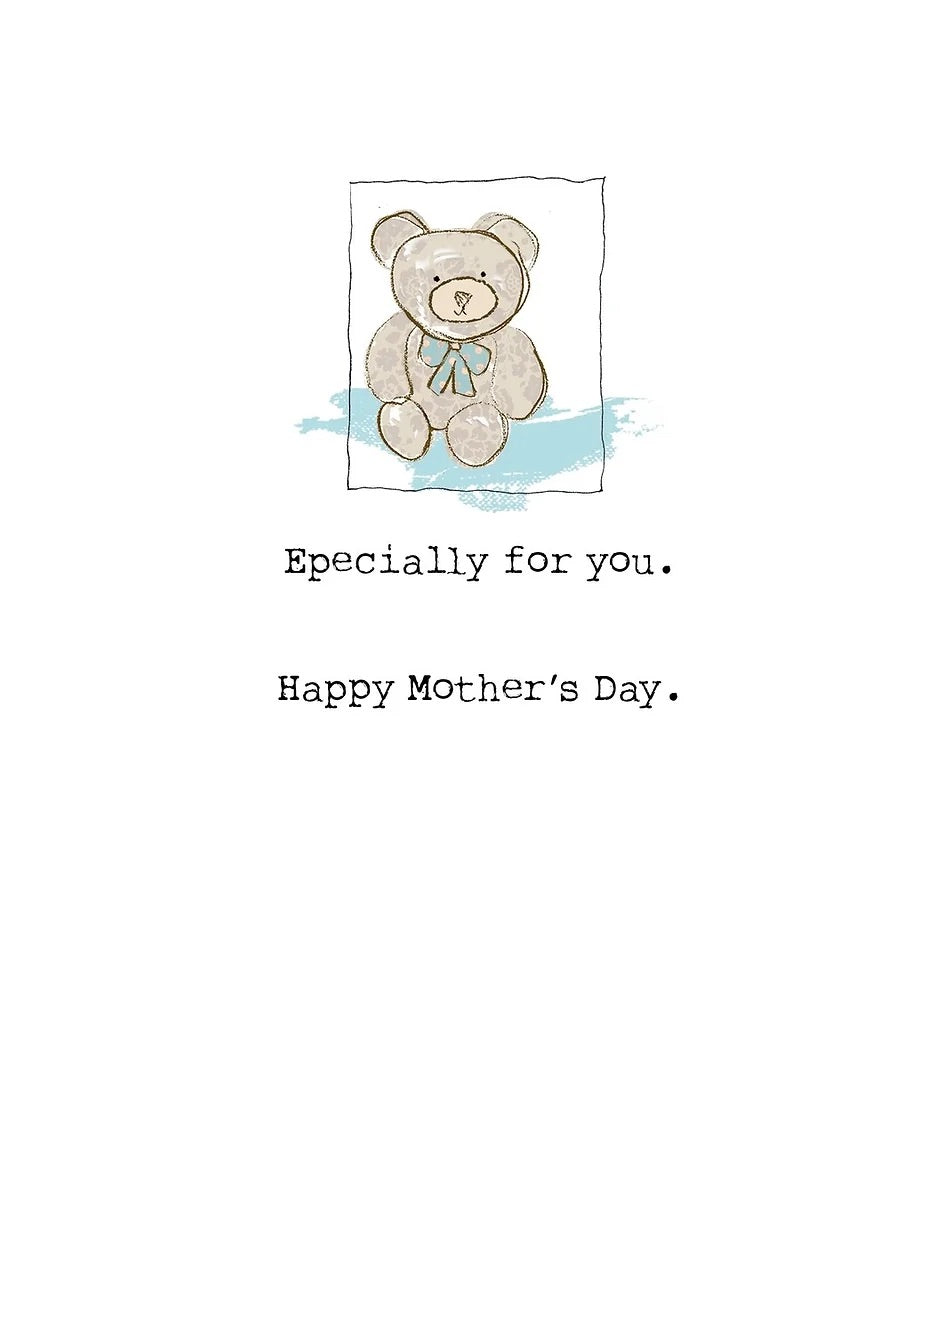 MAFH169 Mother's Day Card